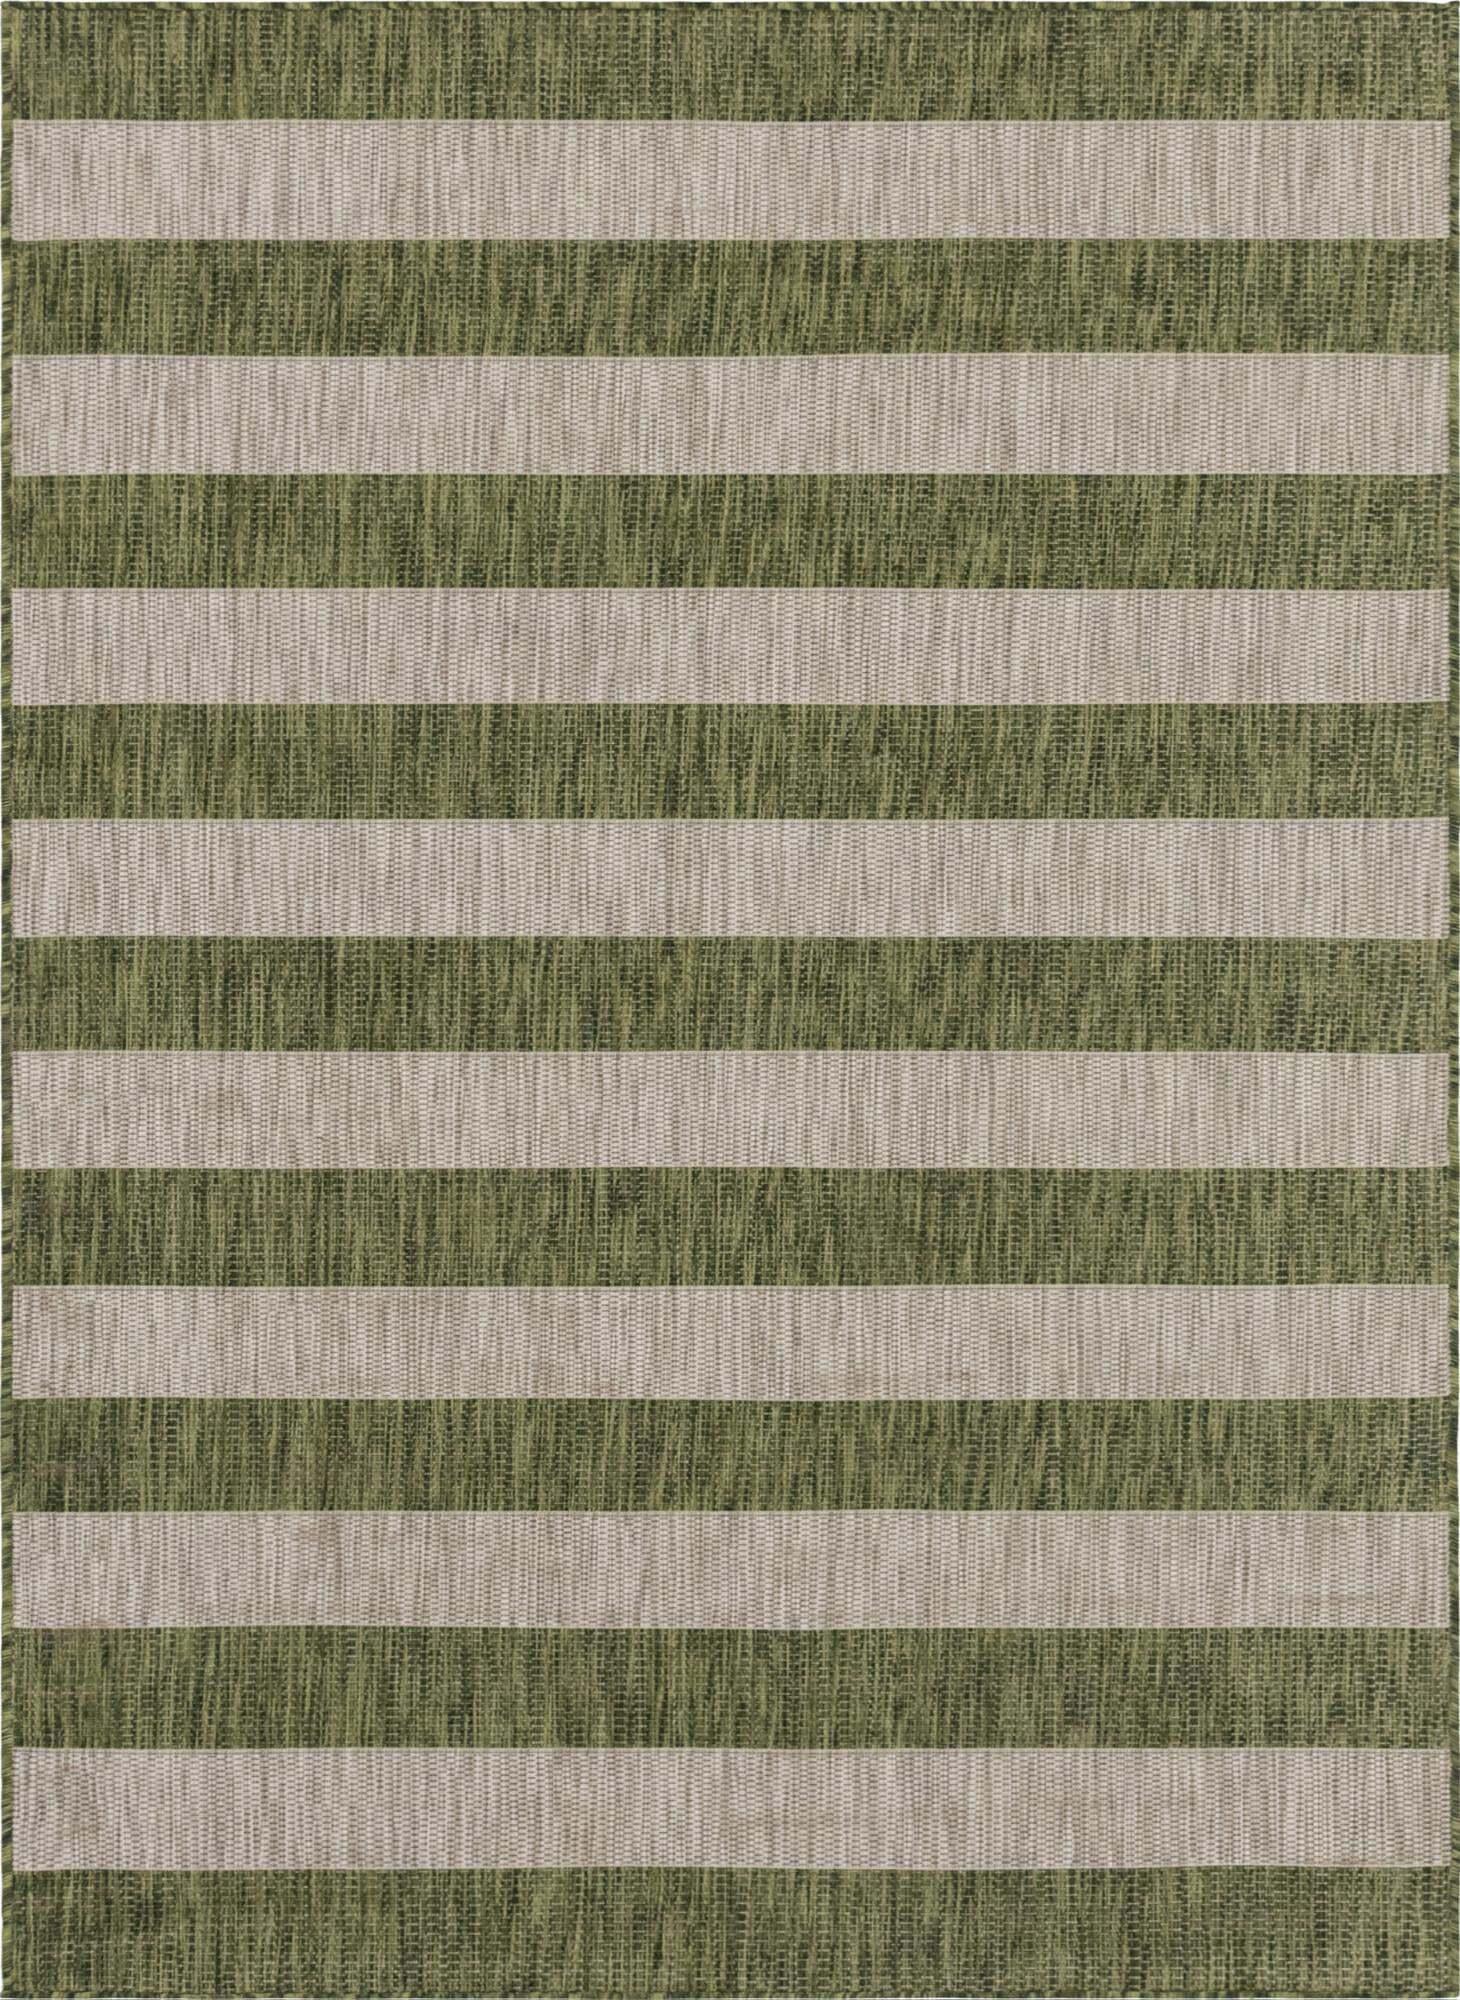 Unique Loom Outdoor Rugs - Outdoor Striped Striped Rectangular 8x11 Rug Green & Ivory